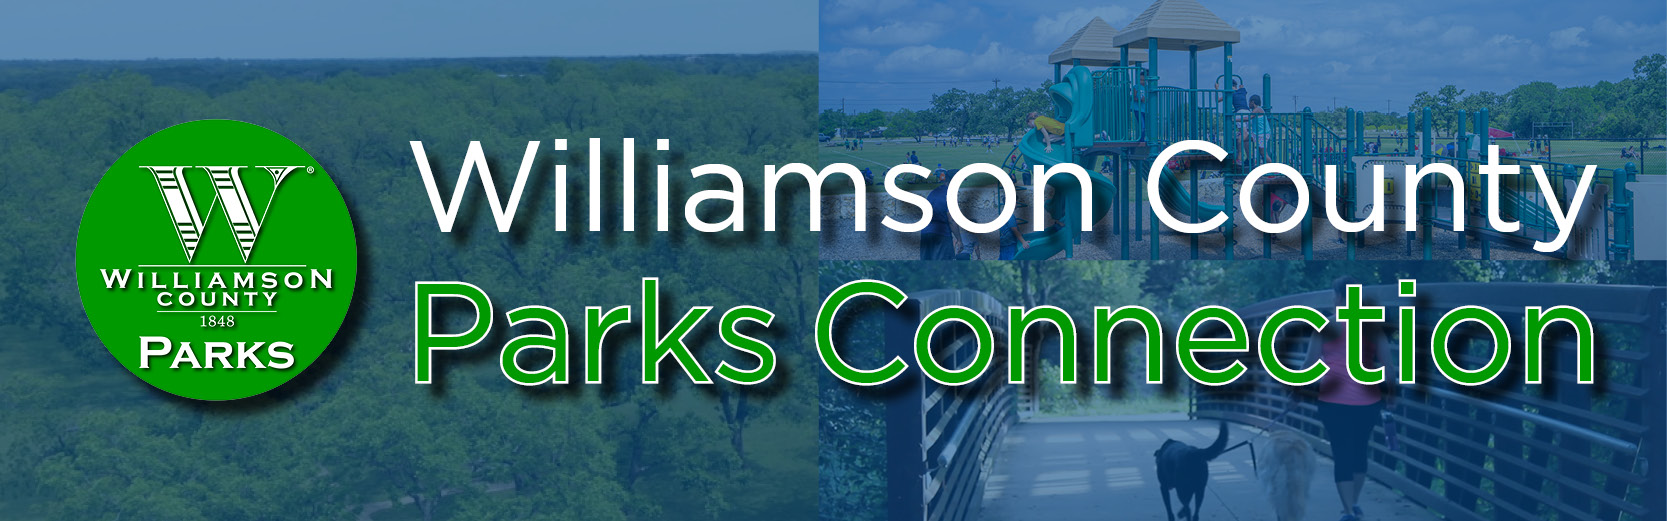 Parks Connection Banner